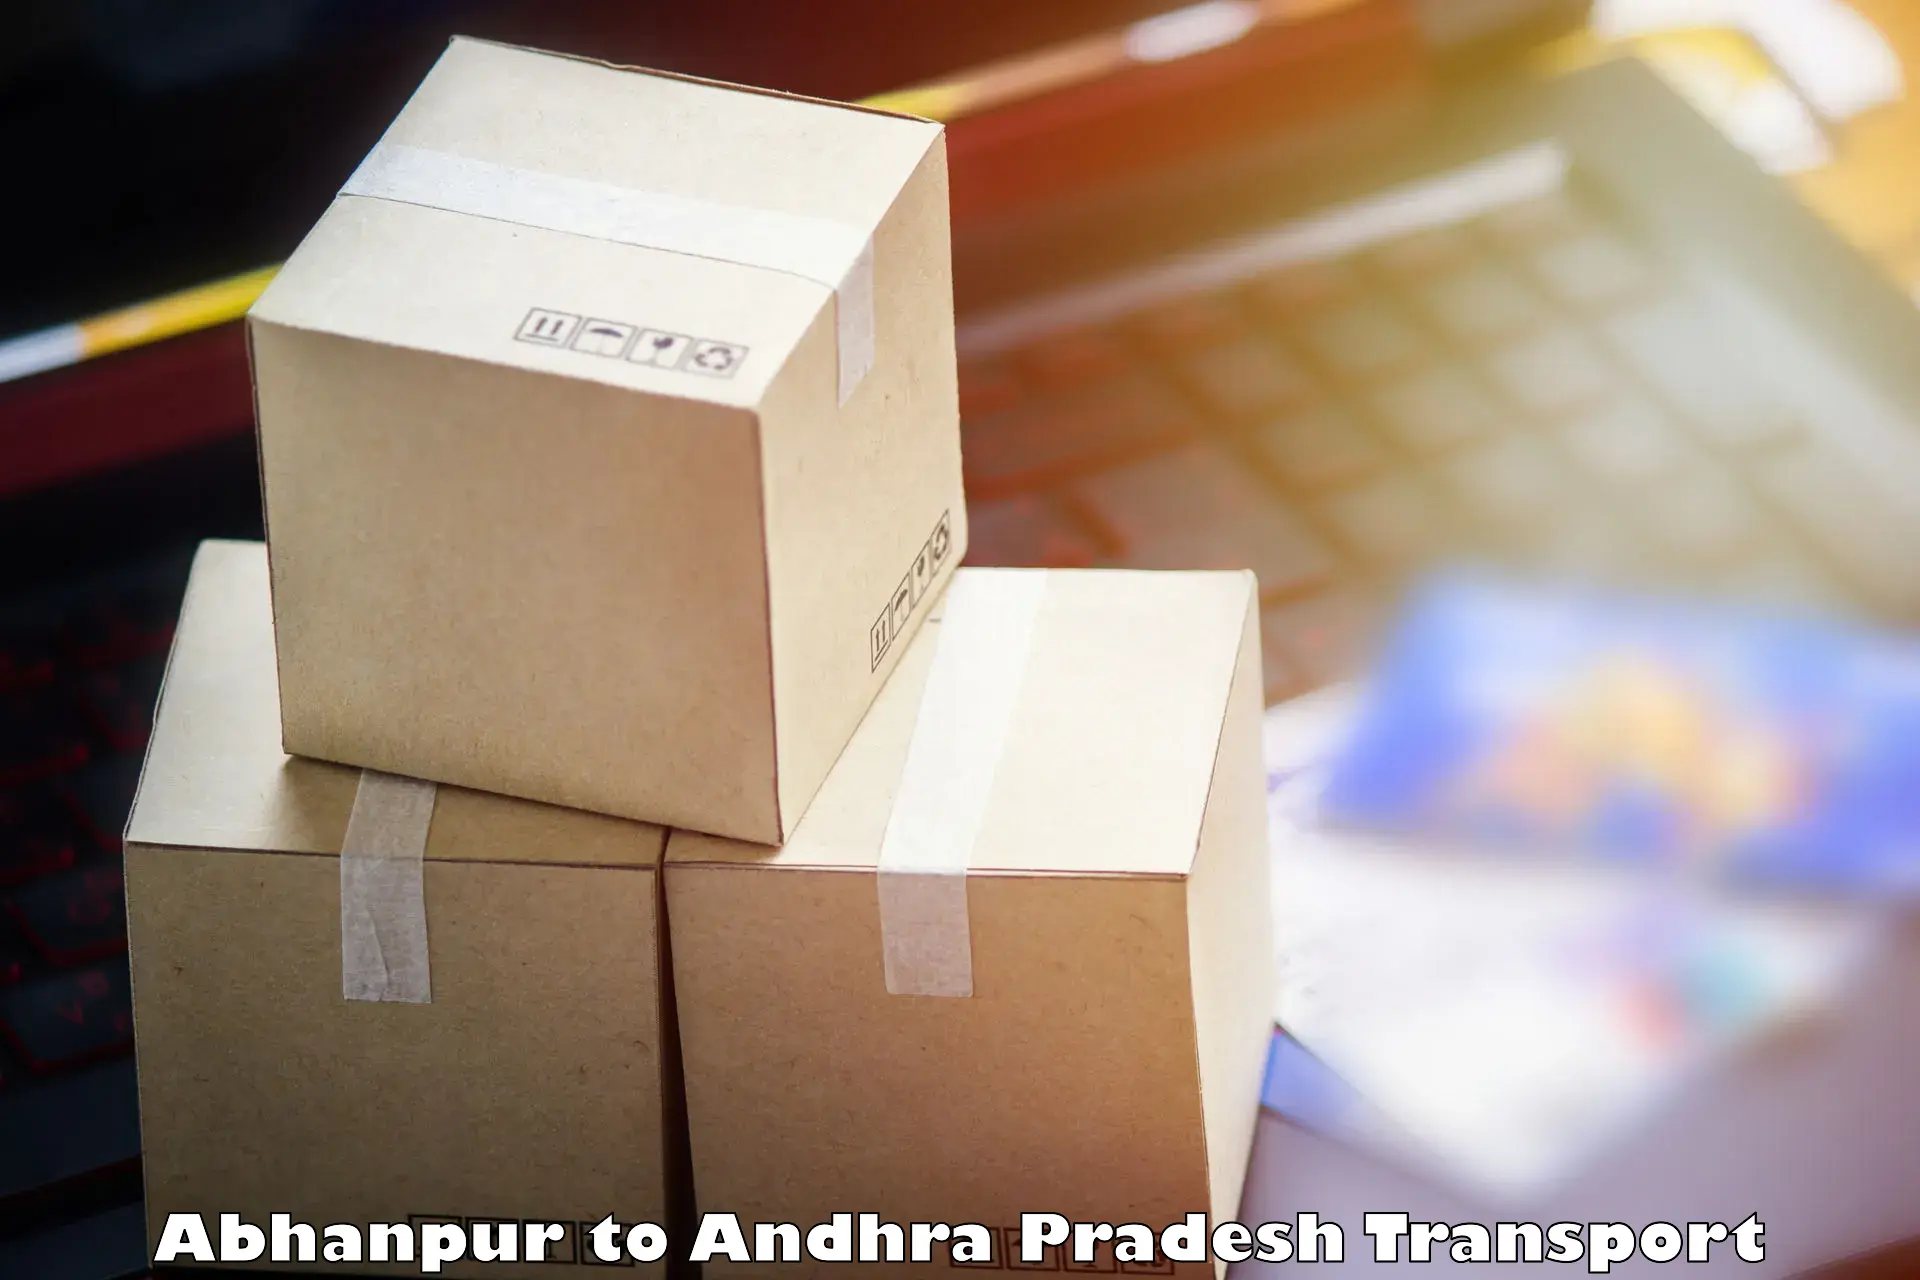 Road transport online services Abhanpur to Andhra Pradesh